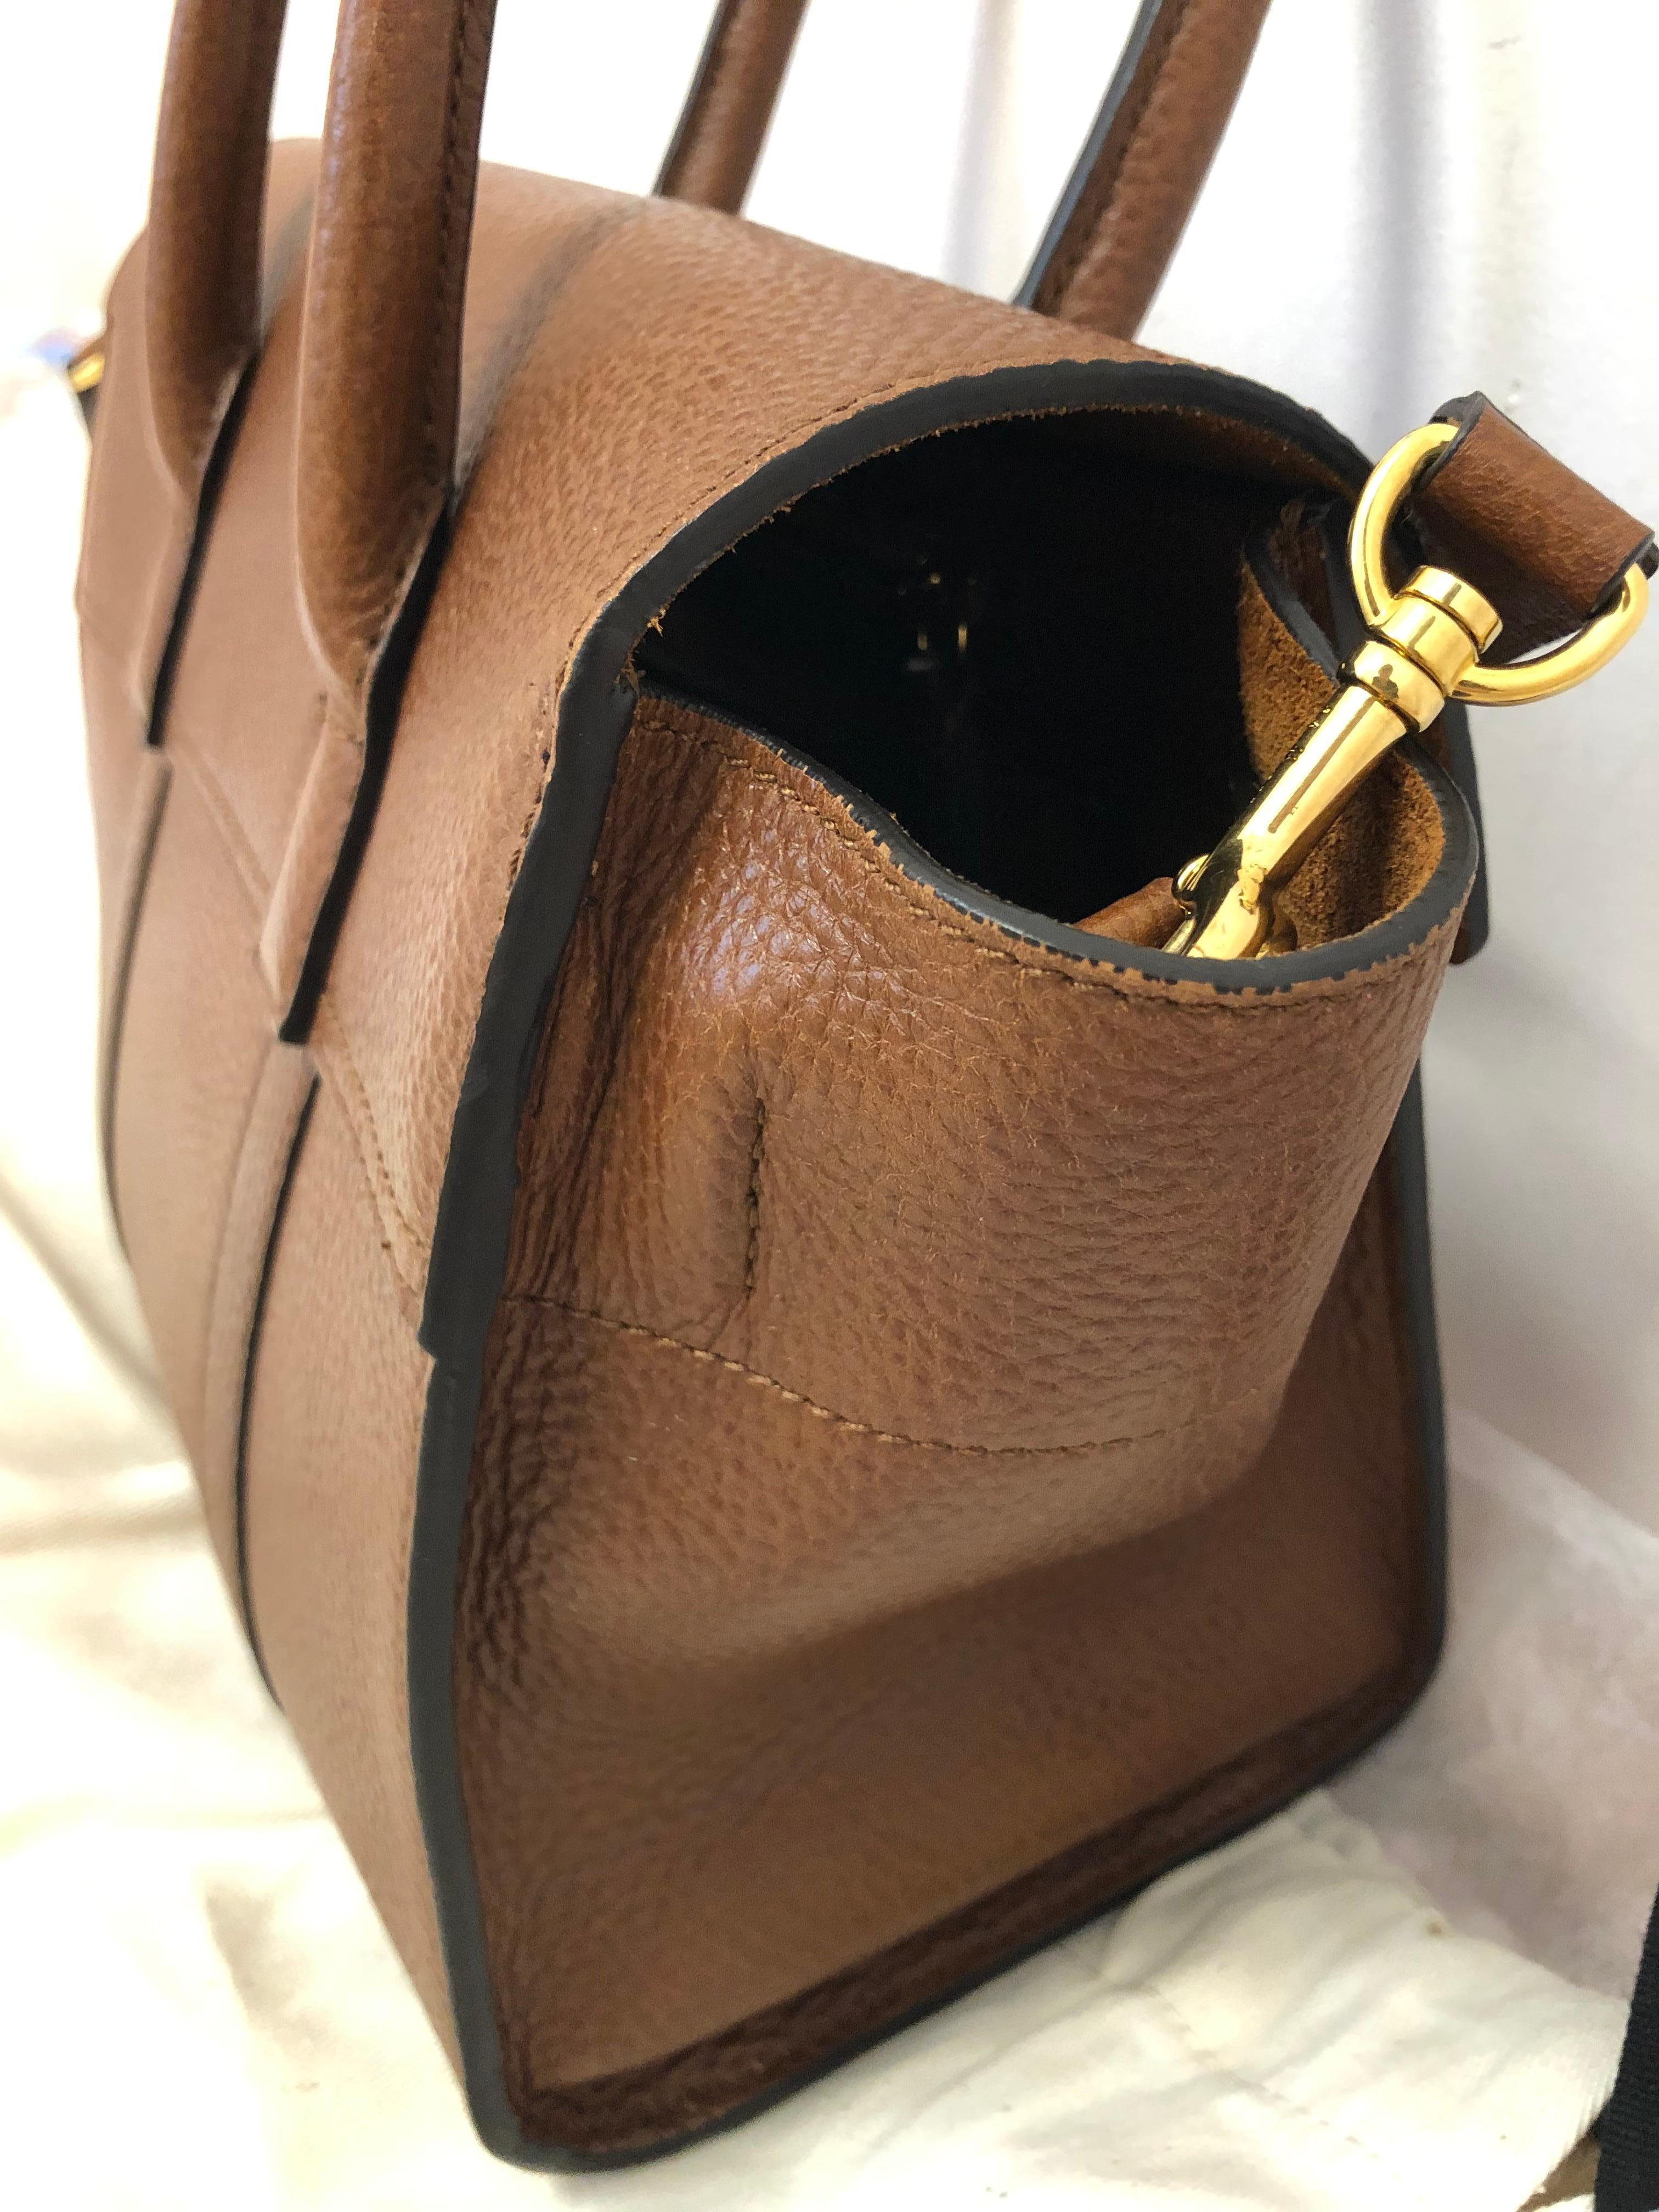 This bag is so elegant, it can be worn crossbody or top handle. The color is oak and the leather natural grain. It is a 2017-18 but in immaculate condition. It is a reprise of 2003 Mulberry Bayswater and designed by Johnny Coca. 
The bag has a suede